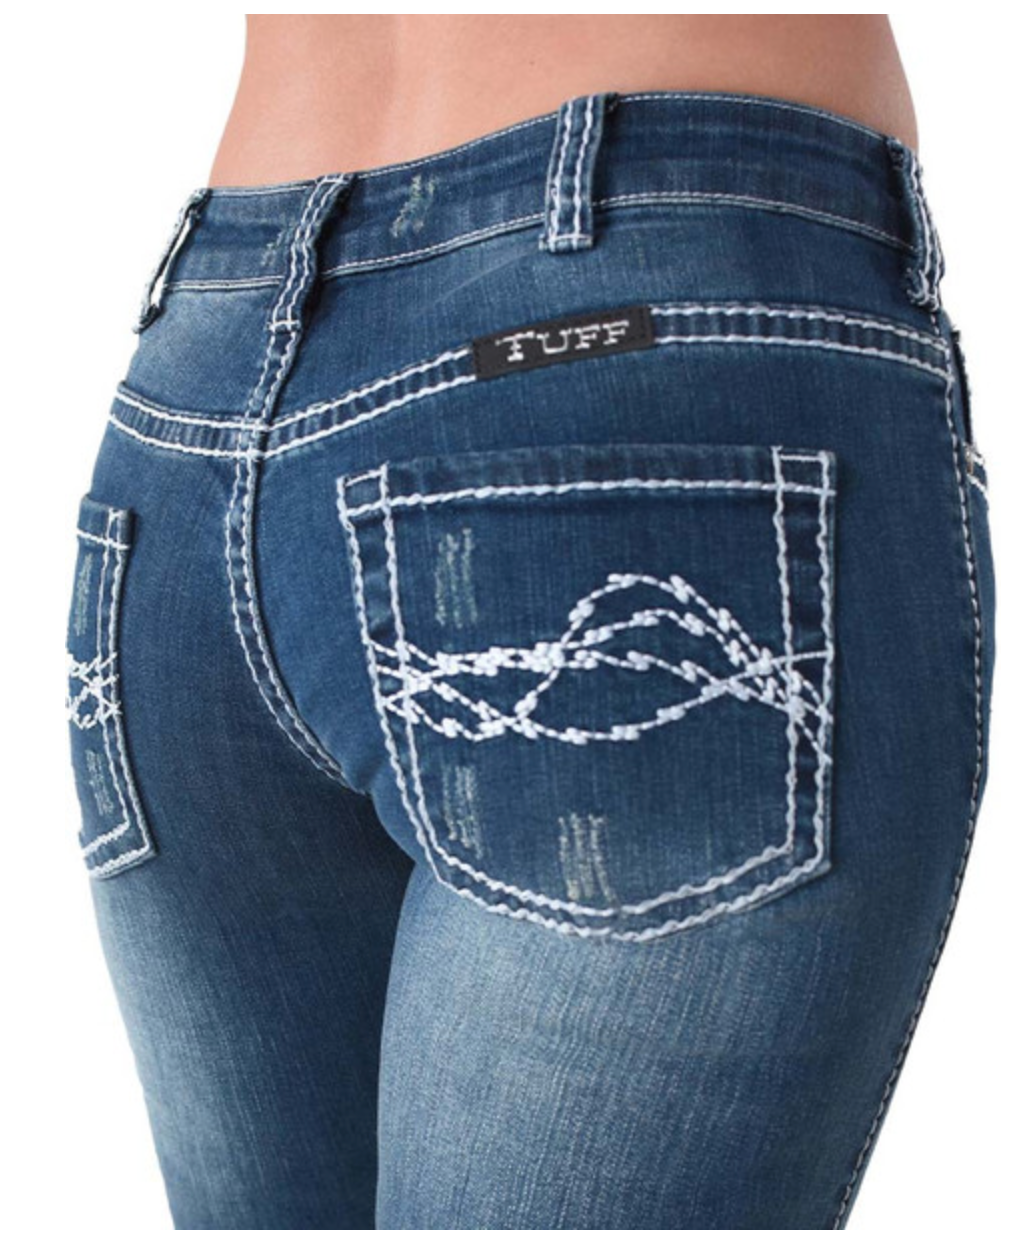 Edgy Jeans